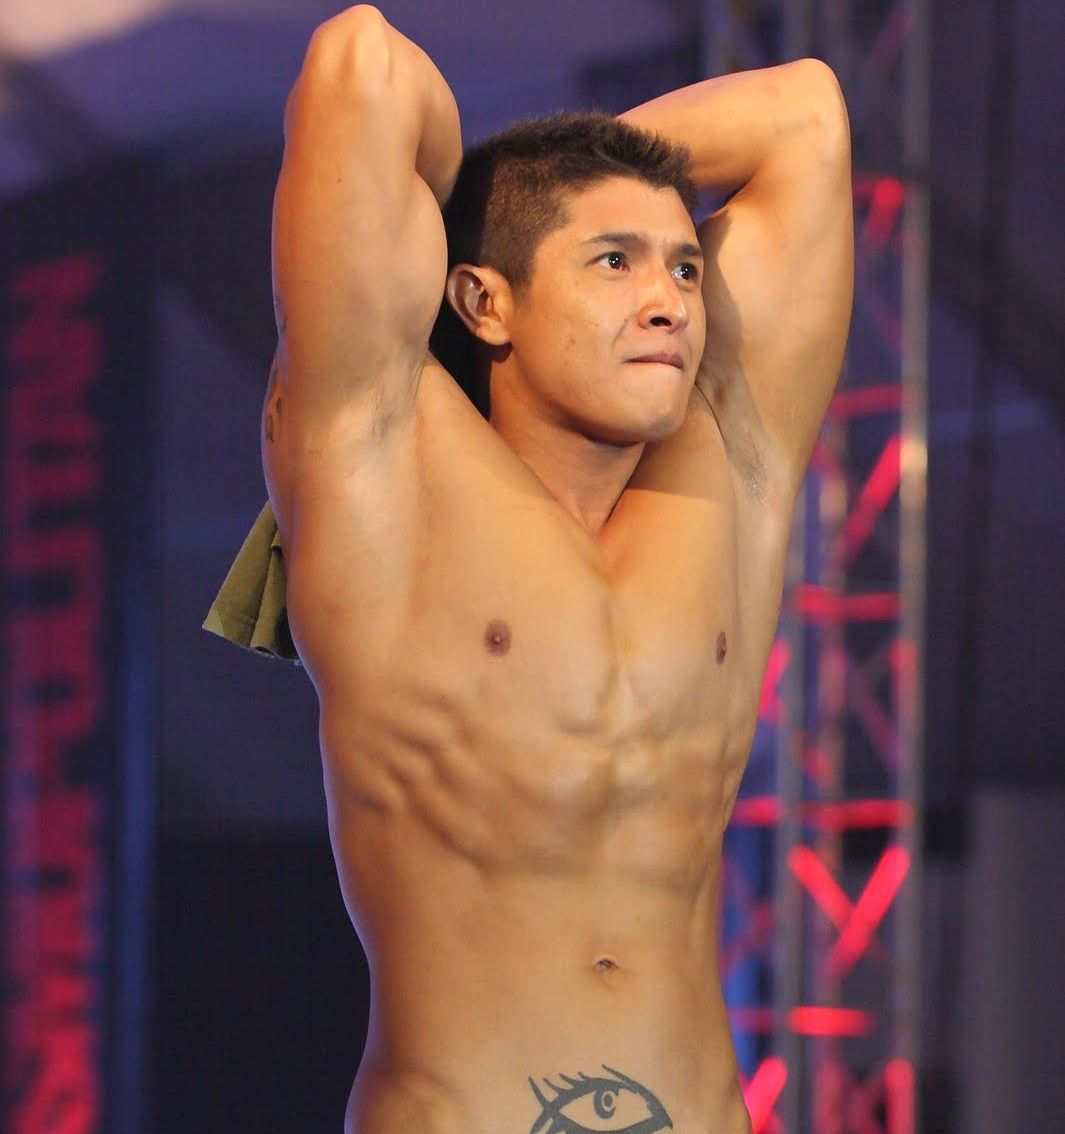 Hunks In Pictures Manuel Chua Jr